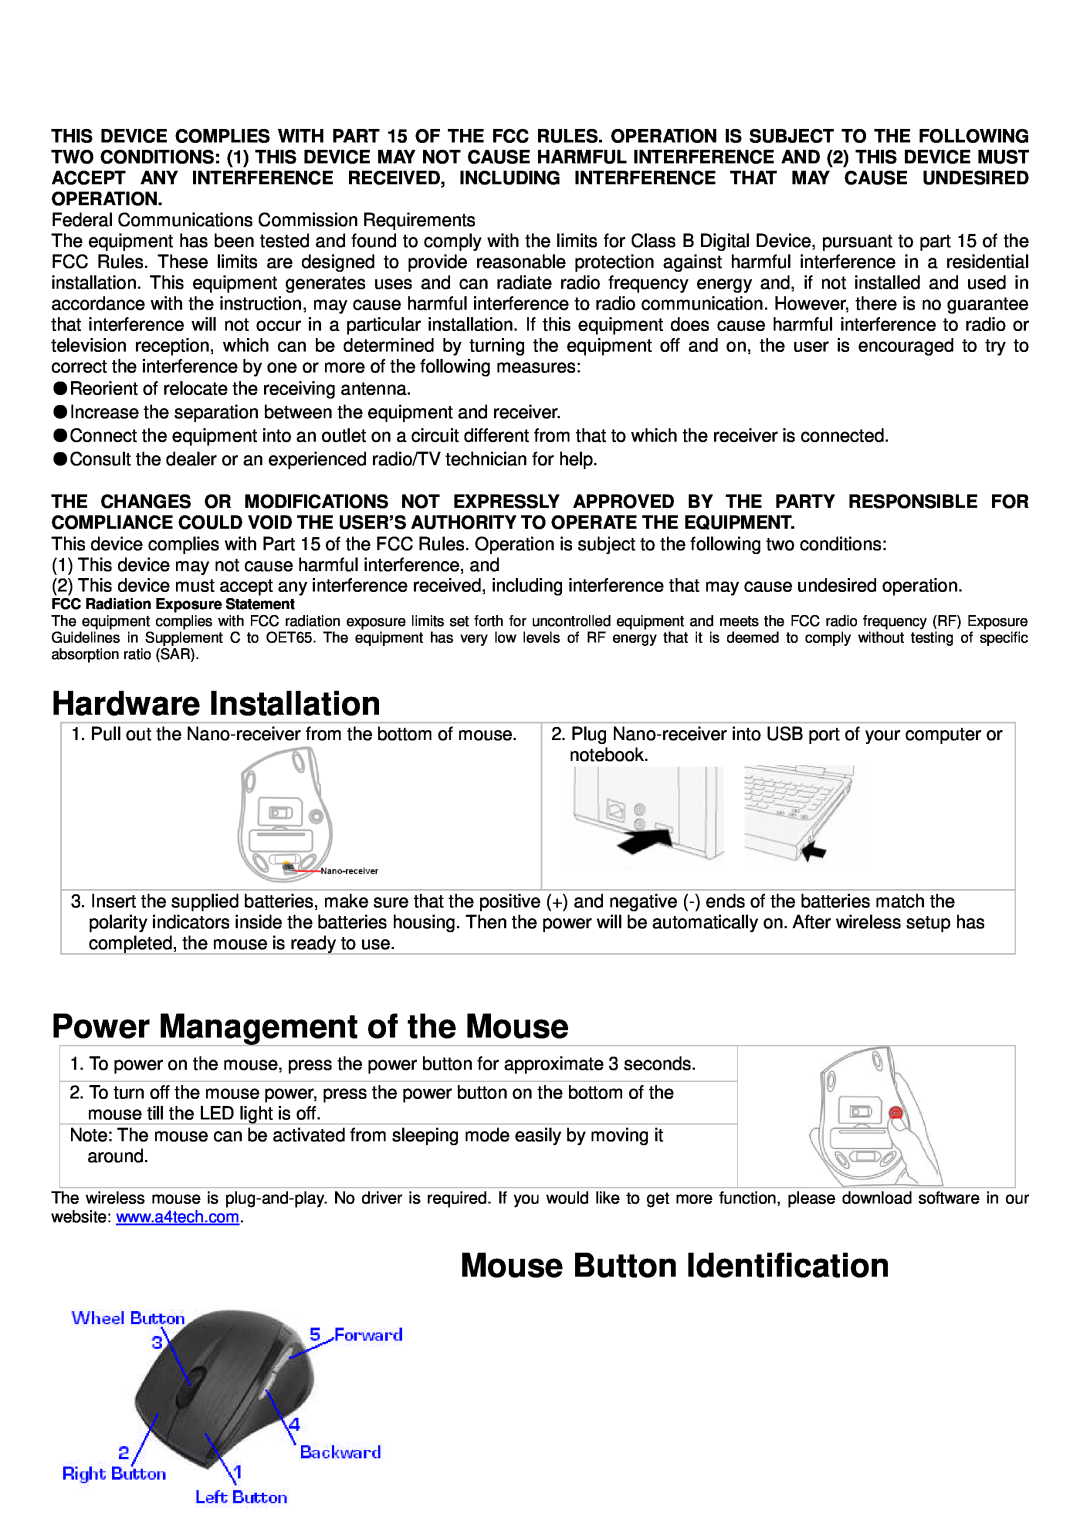 A4 Tech G7-750 user manual Hardware Installation, Power Management of the Mouse, Mouse Button Identification 